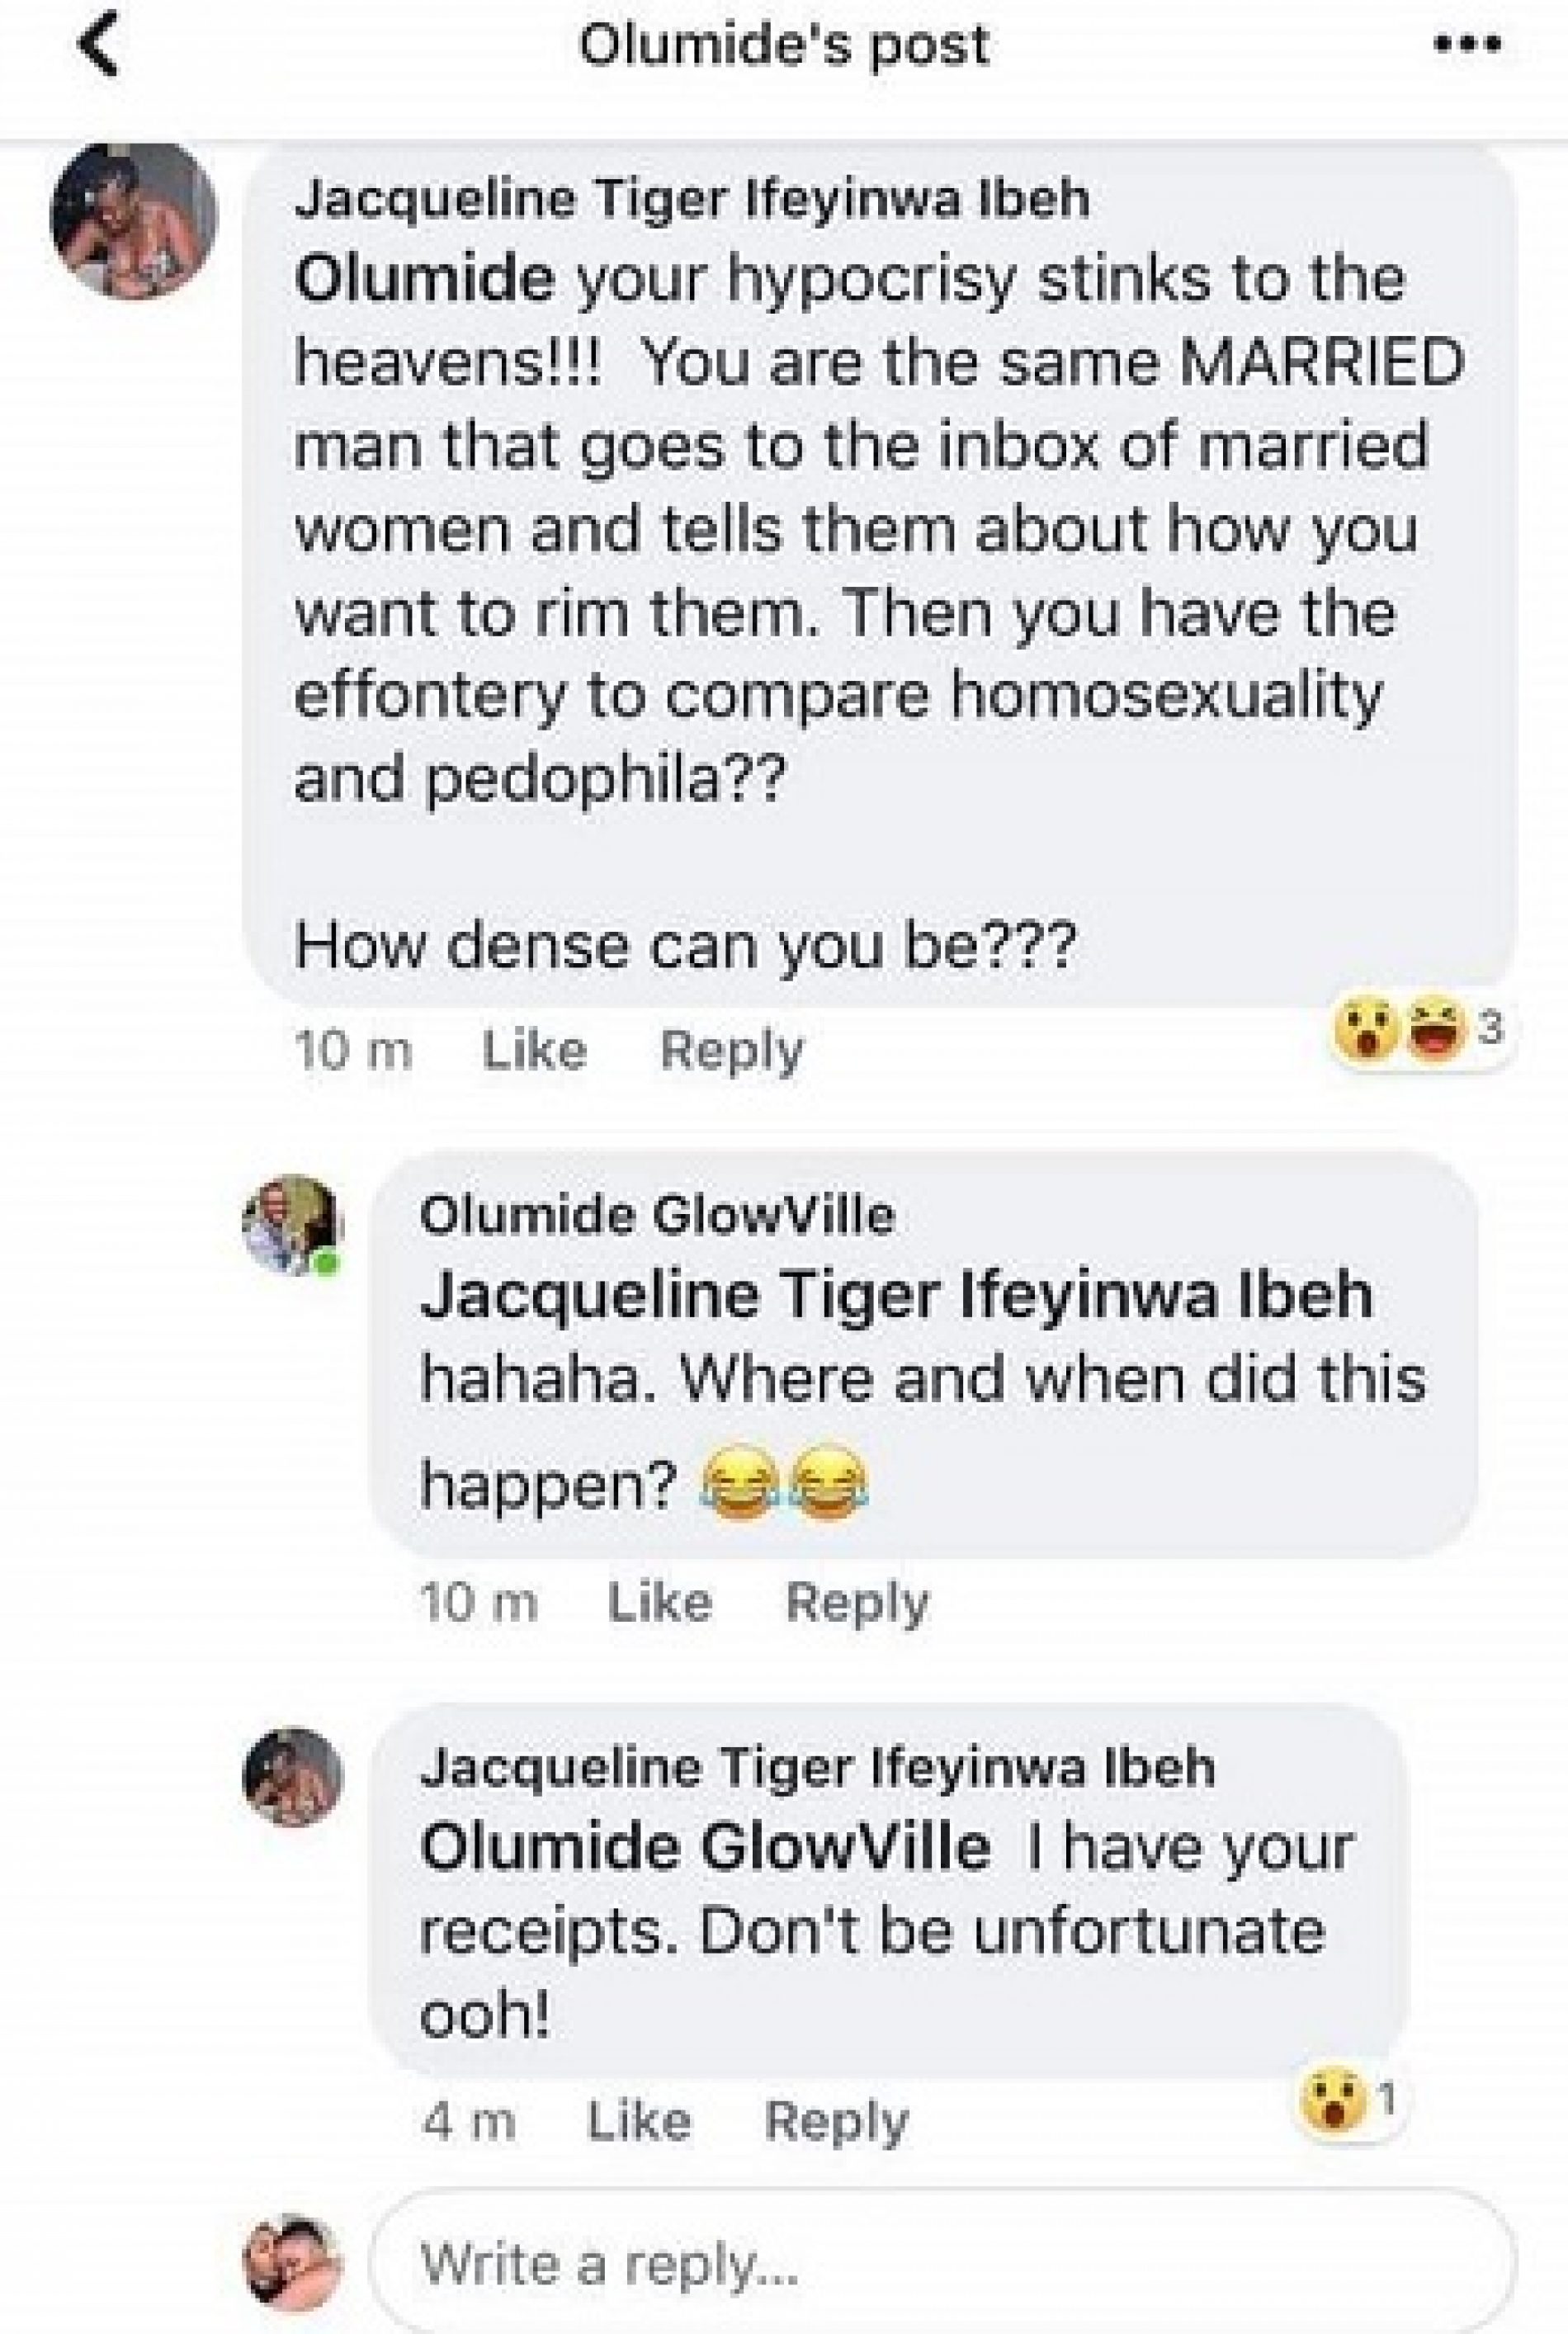 Facebook Gets Messy With Olumide Glowville’s Hypocrisy